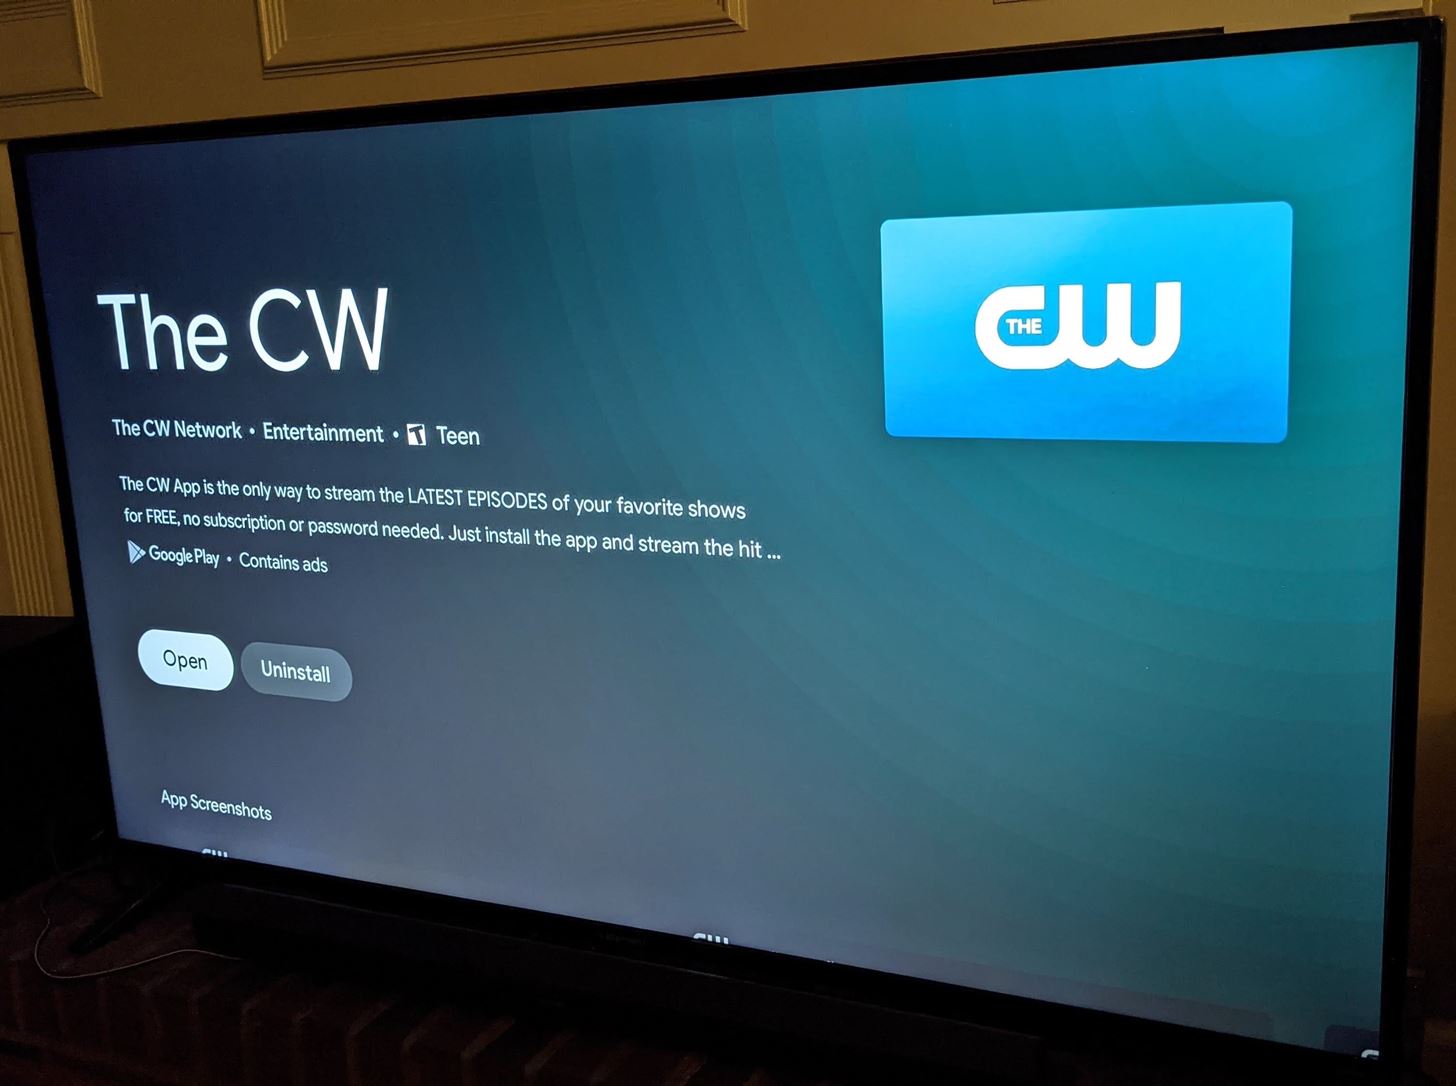 How to Install Apps on Chromecast with Google TV